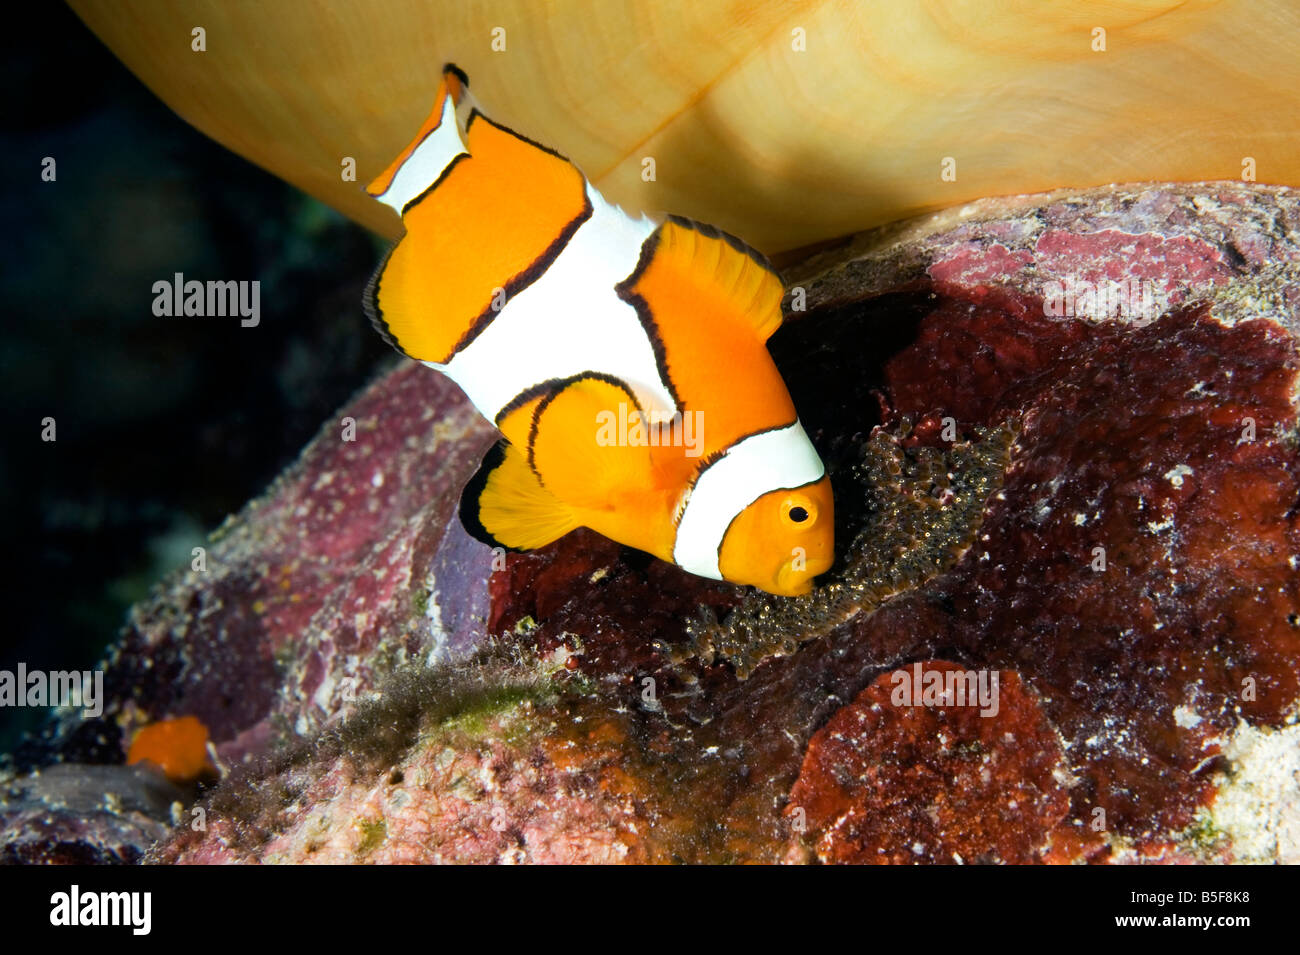 ClownAnemonefish, Amphiprion percula, tending its eggs laid under the anemone. The eggs are almost ready to hatch and the babies eyes can be seen Stock Photo